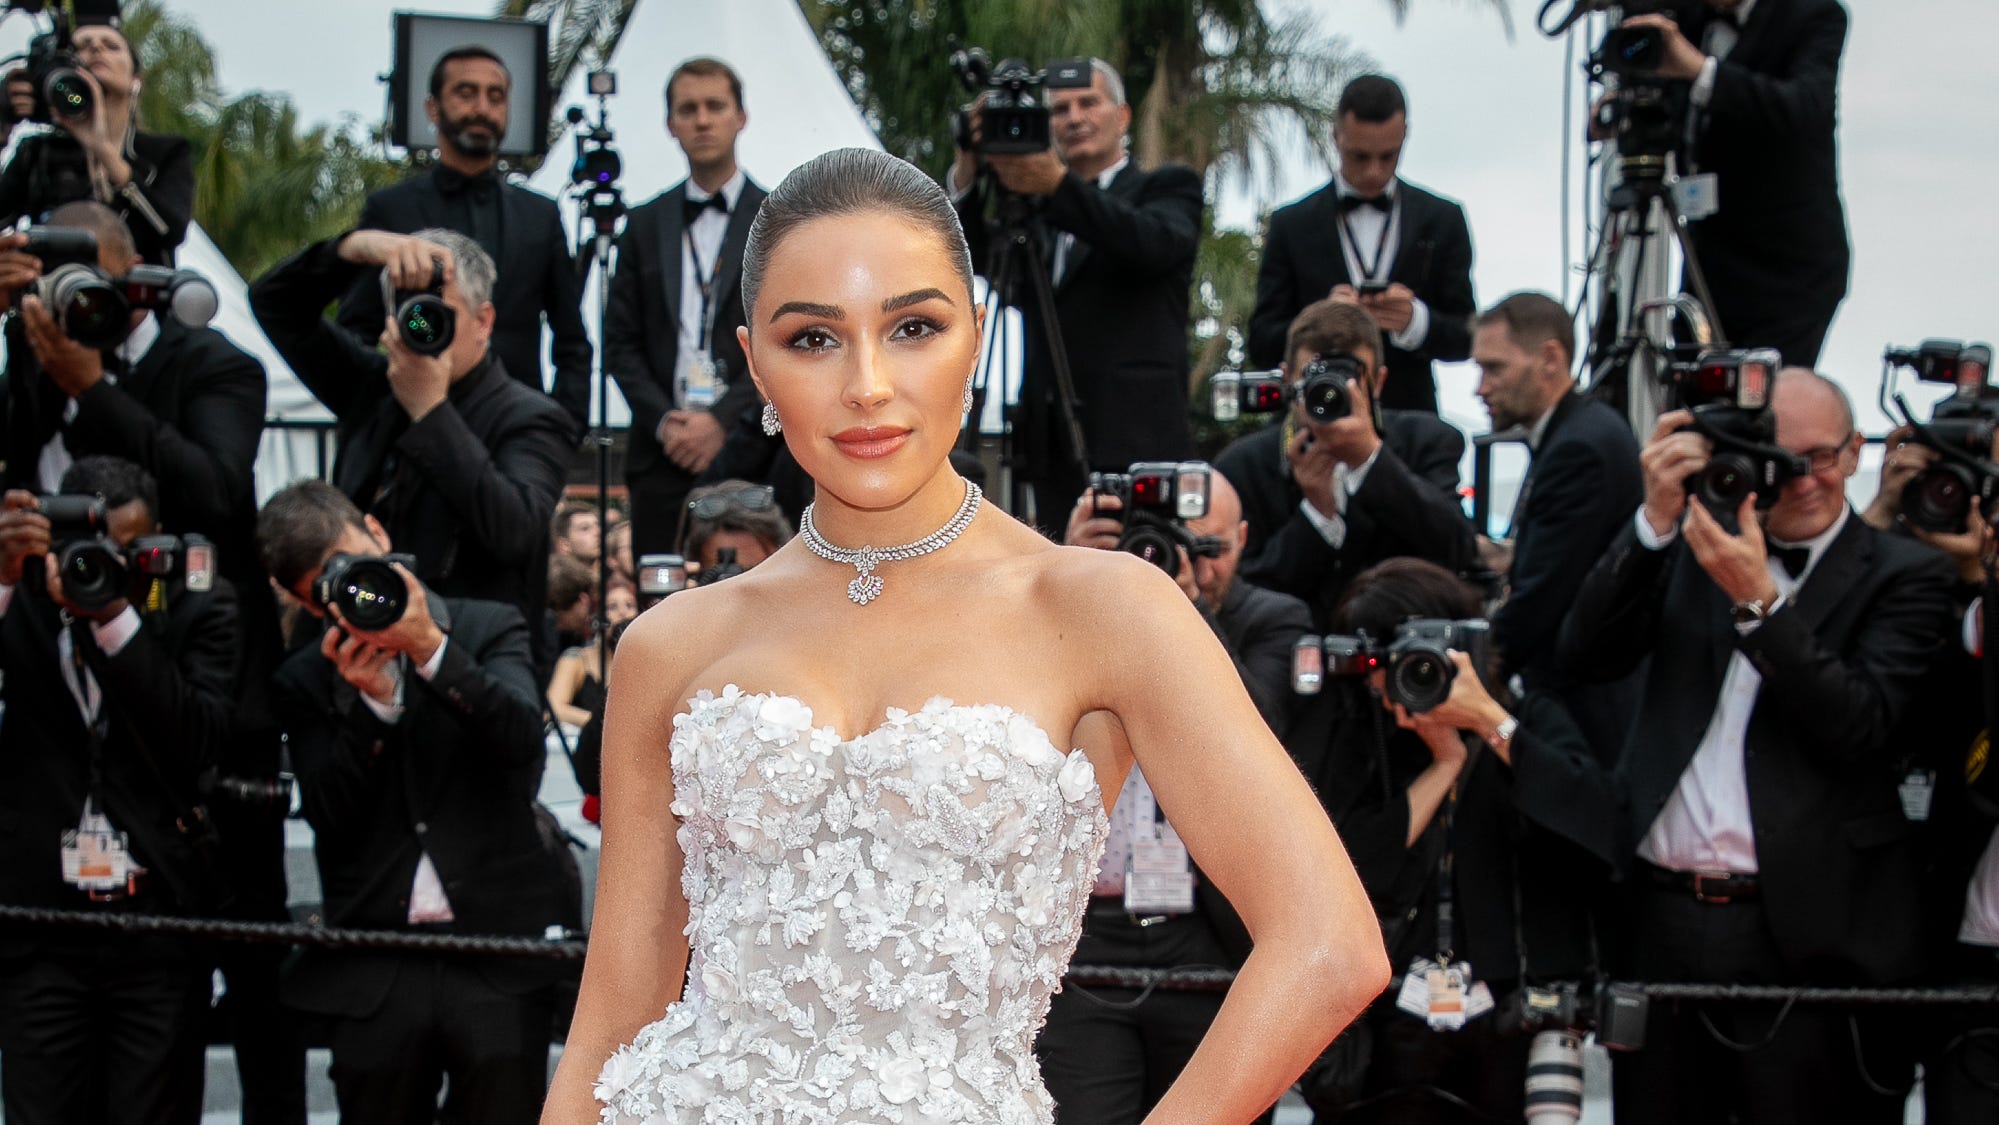 Olivia Culpo, former Miss Universe, told to cover up  crop top by American Airlines flight